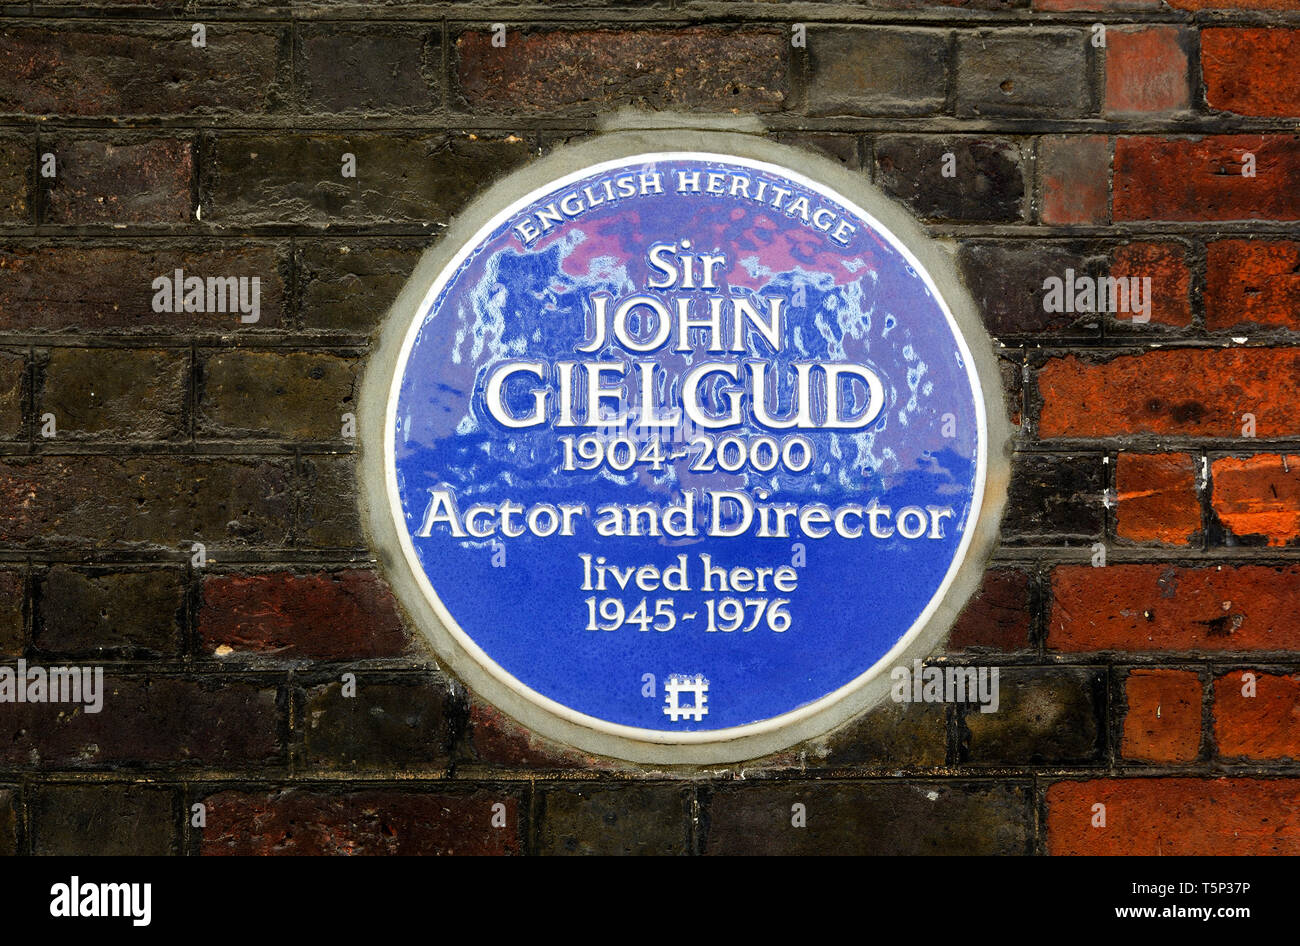 London, England, UK. Commemorative Blue Plaque: Sir John Gielgud 1904-2000 Actor and Director lived here 1945-1976. 16 Cowley Street, Westminster Stock Photo